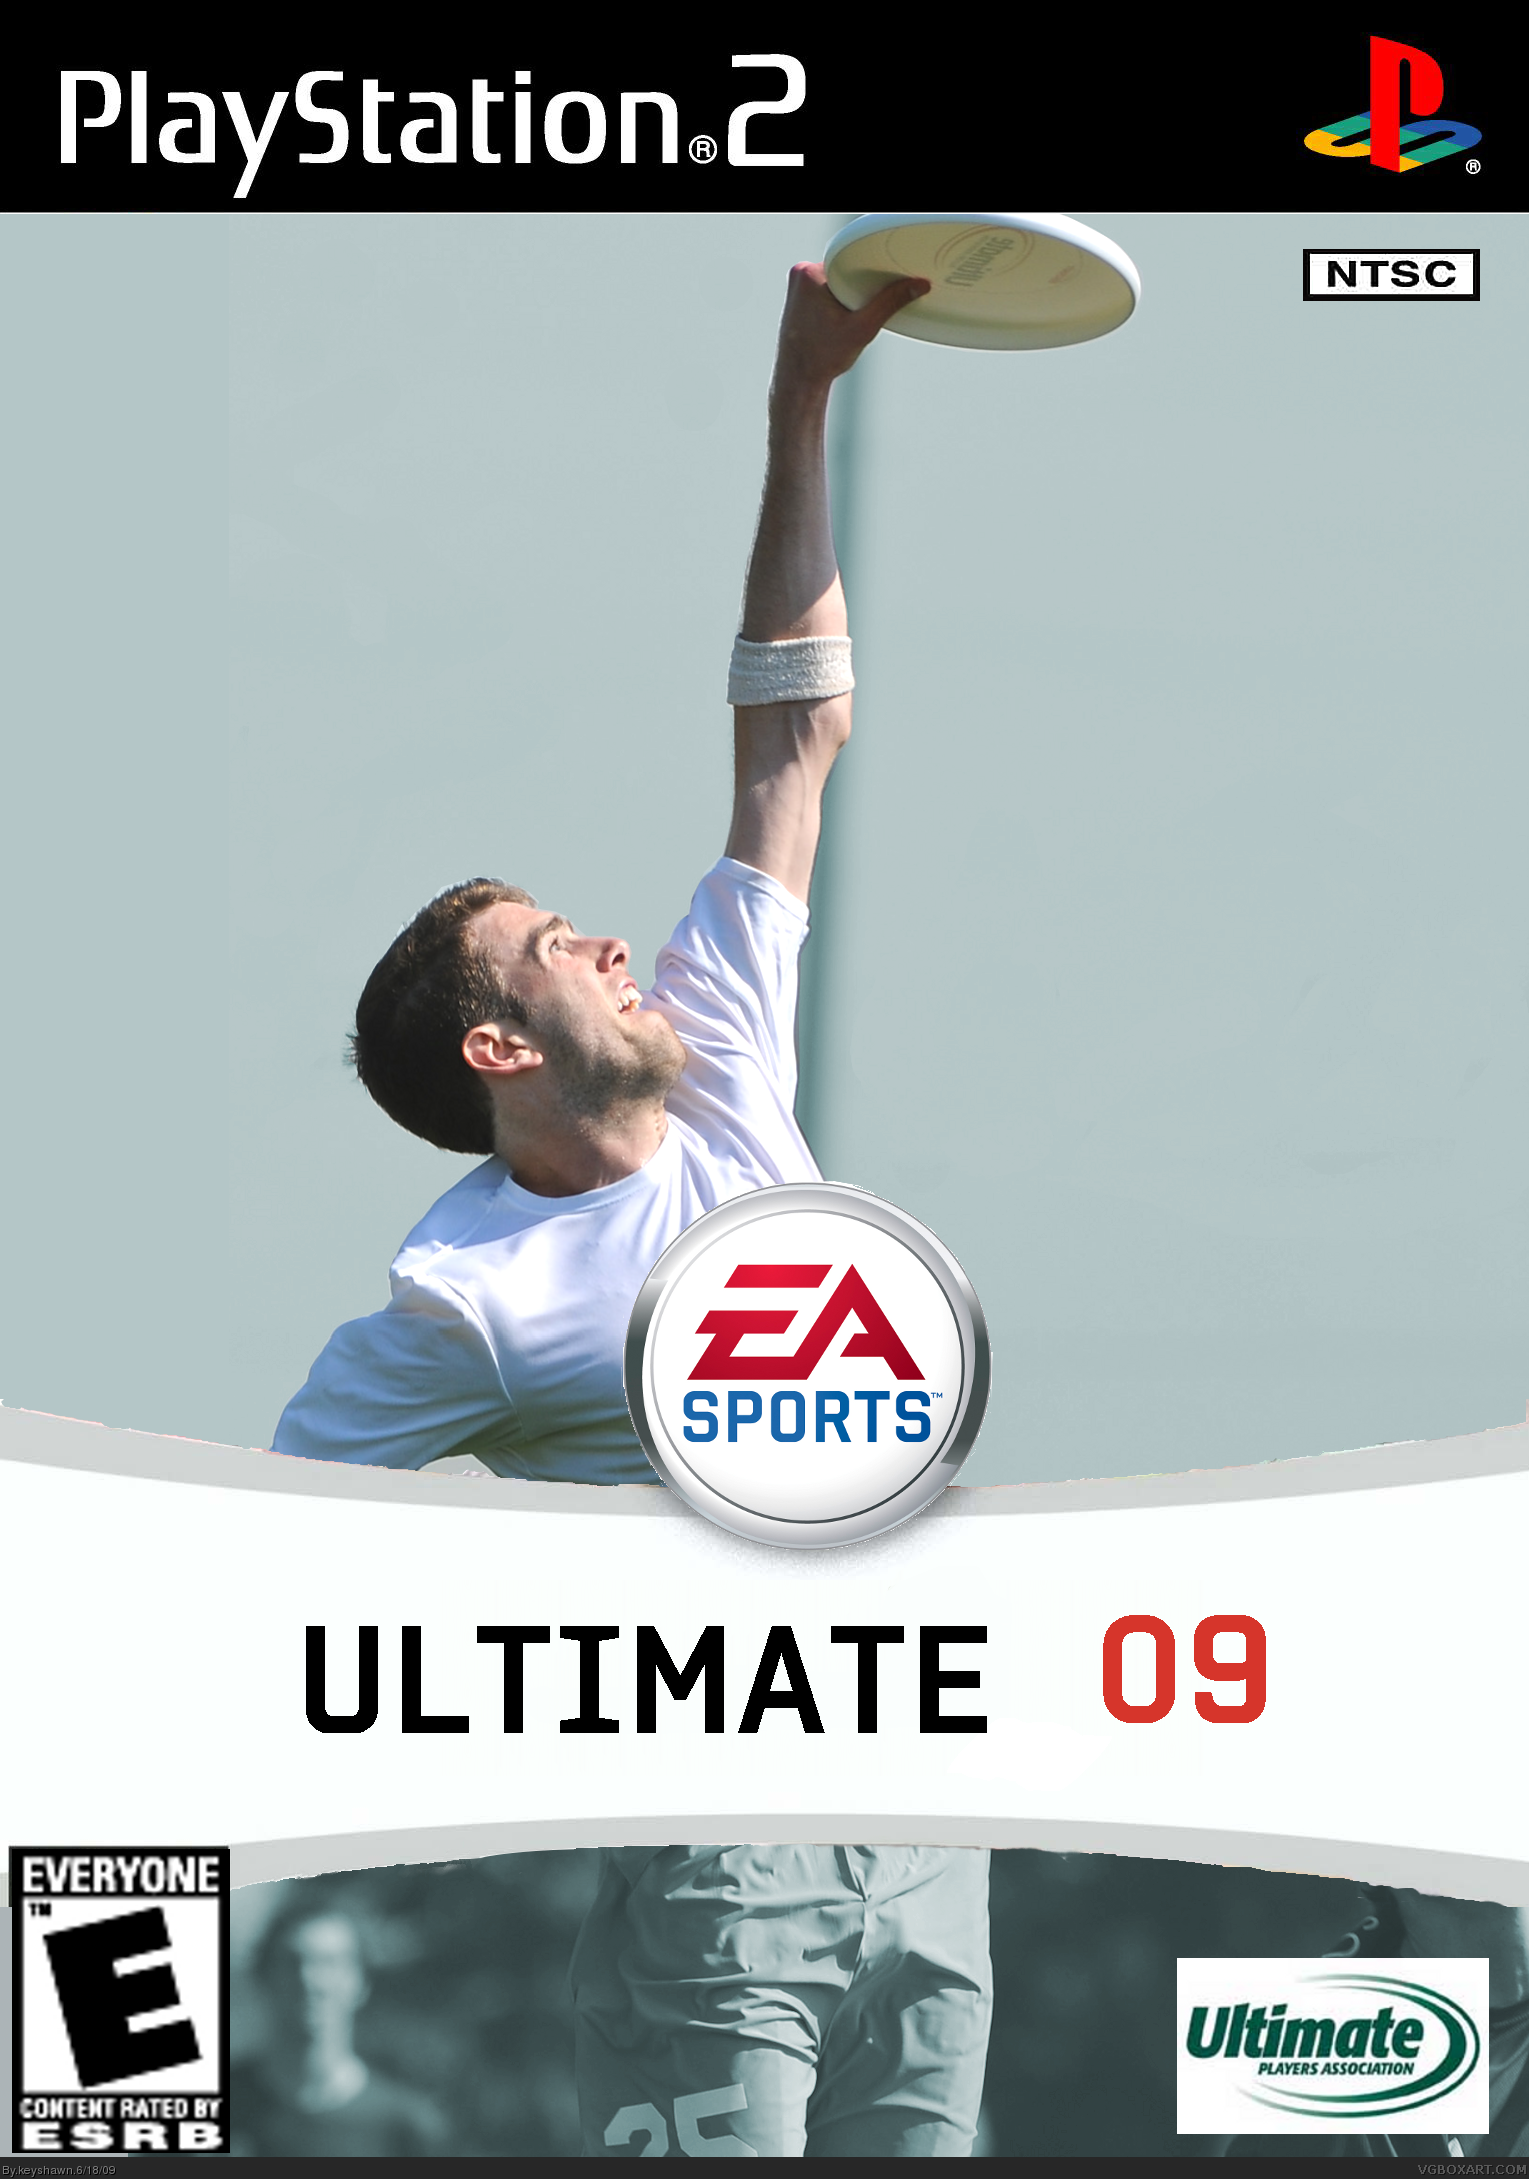 Ultimate Frisbee 09 box cover